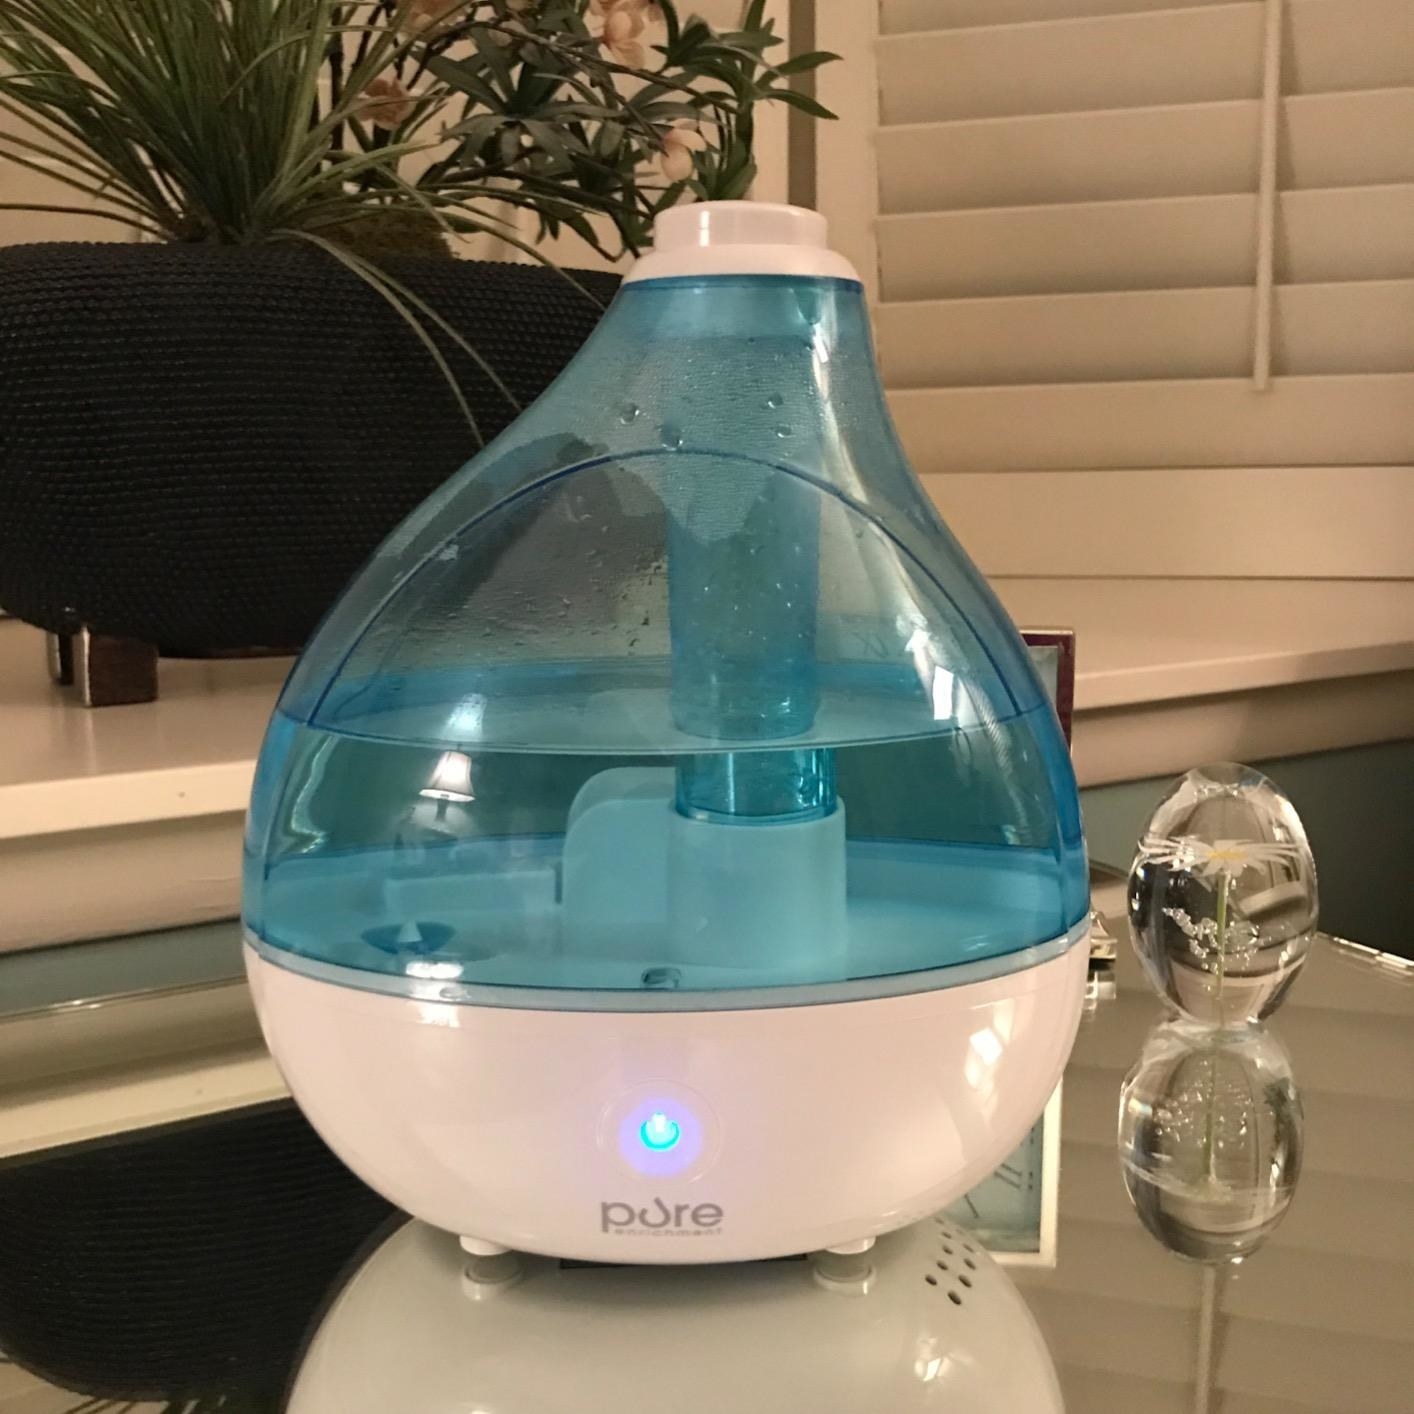 the humidifier filled with water sitting on a desk